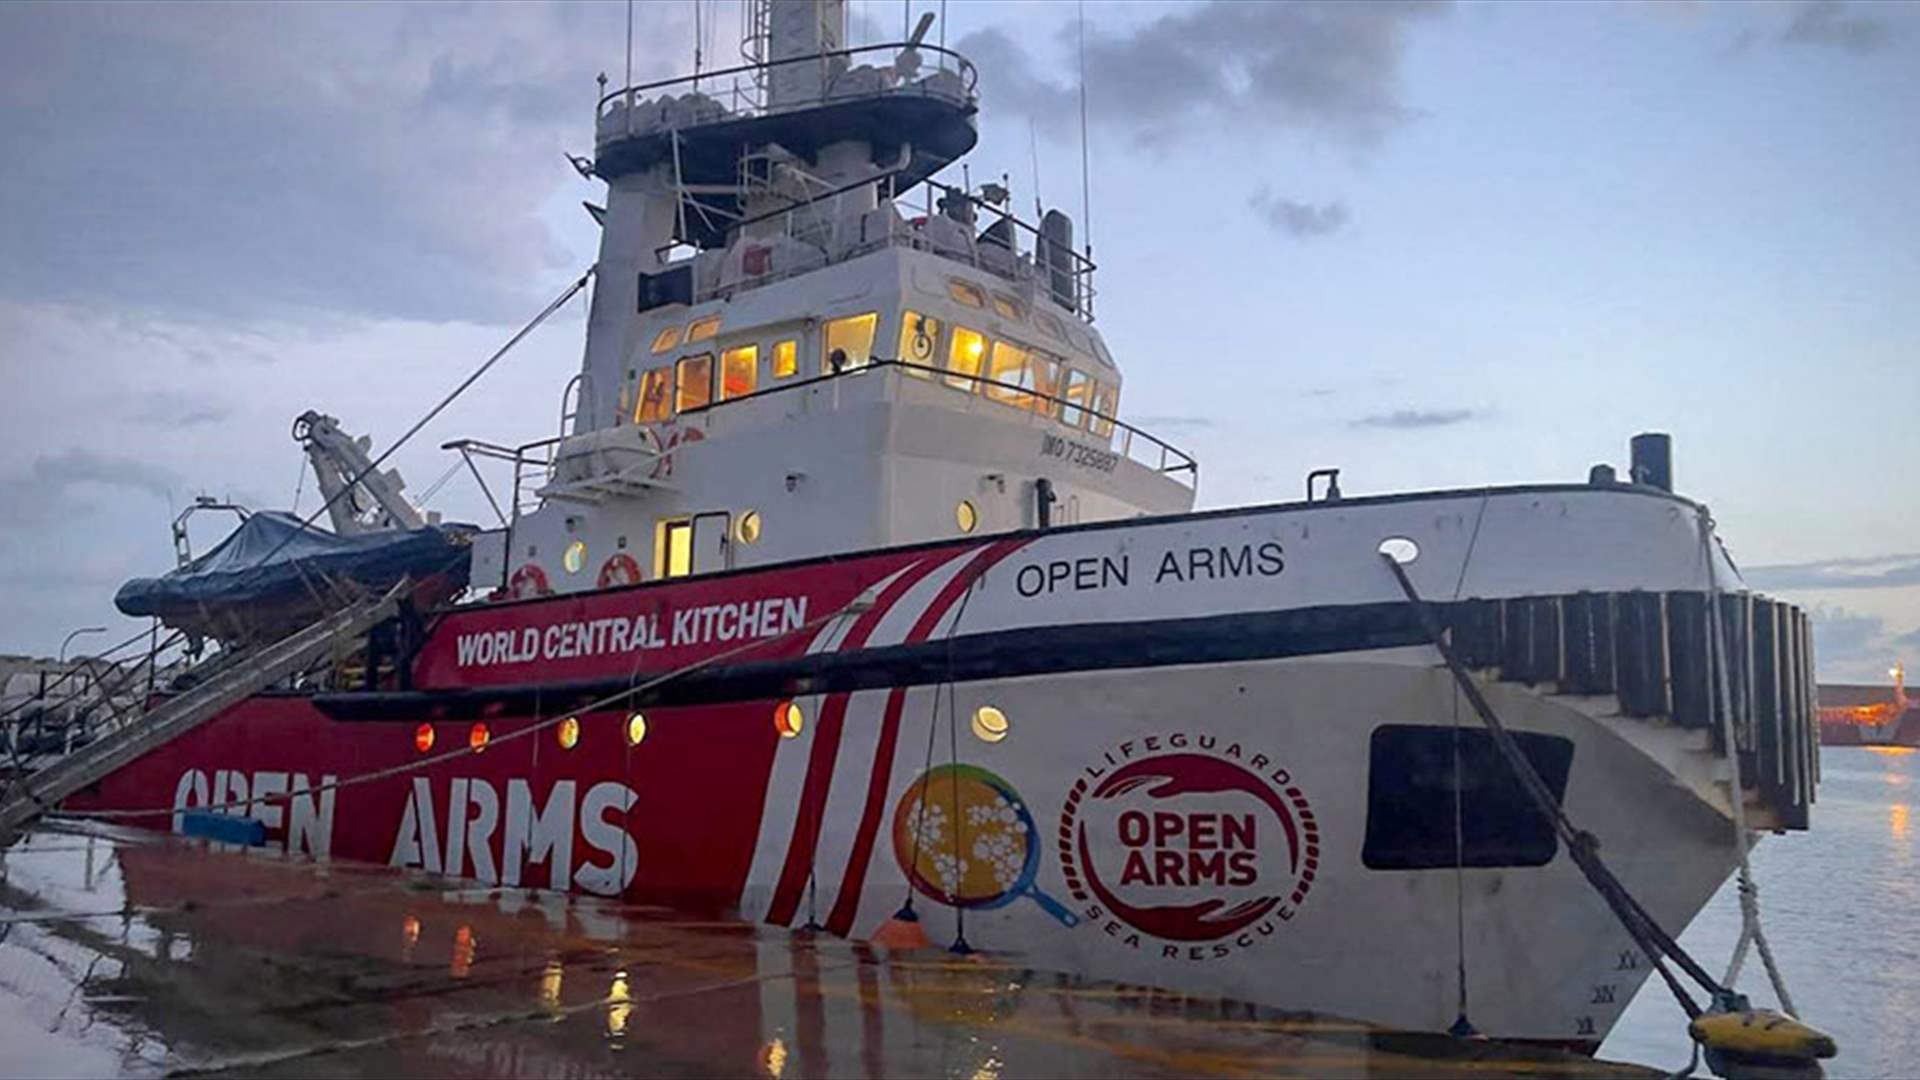 First aid ship to Gaza leaves Cyprus